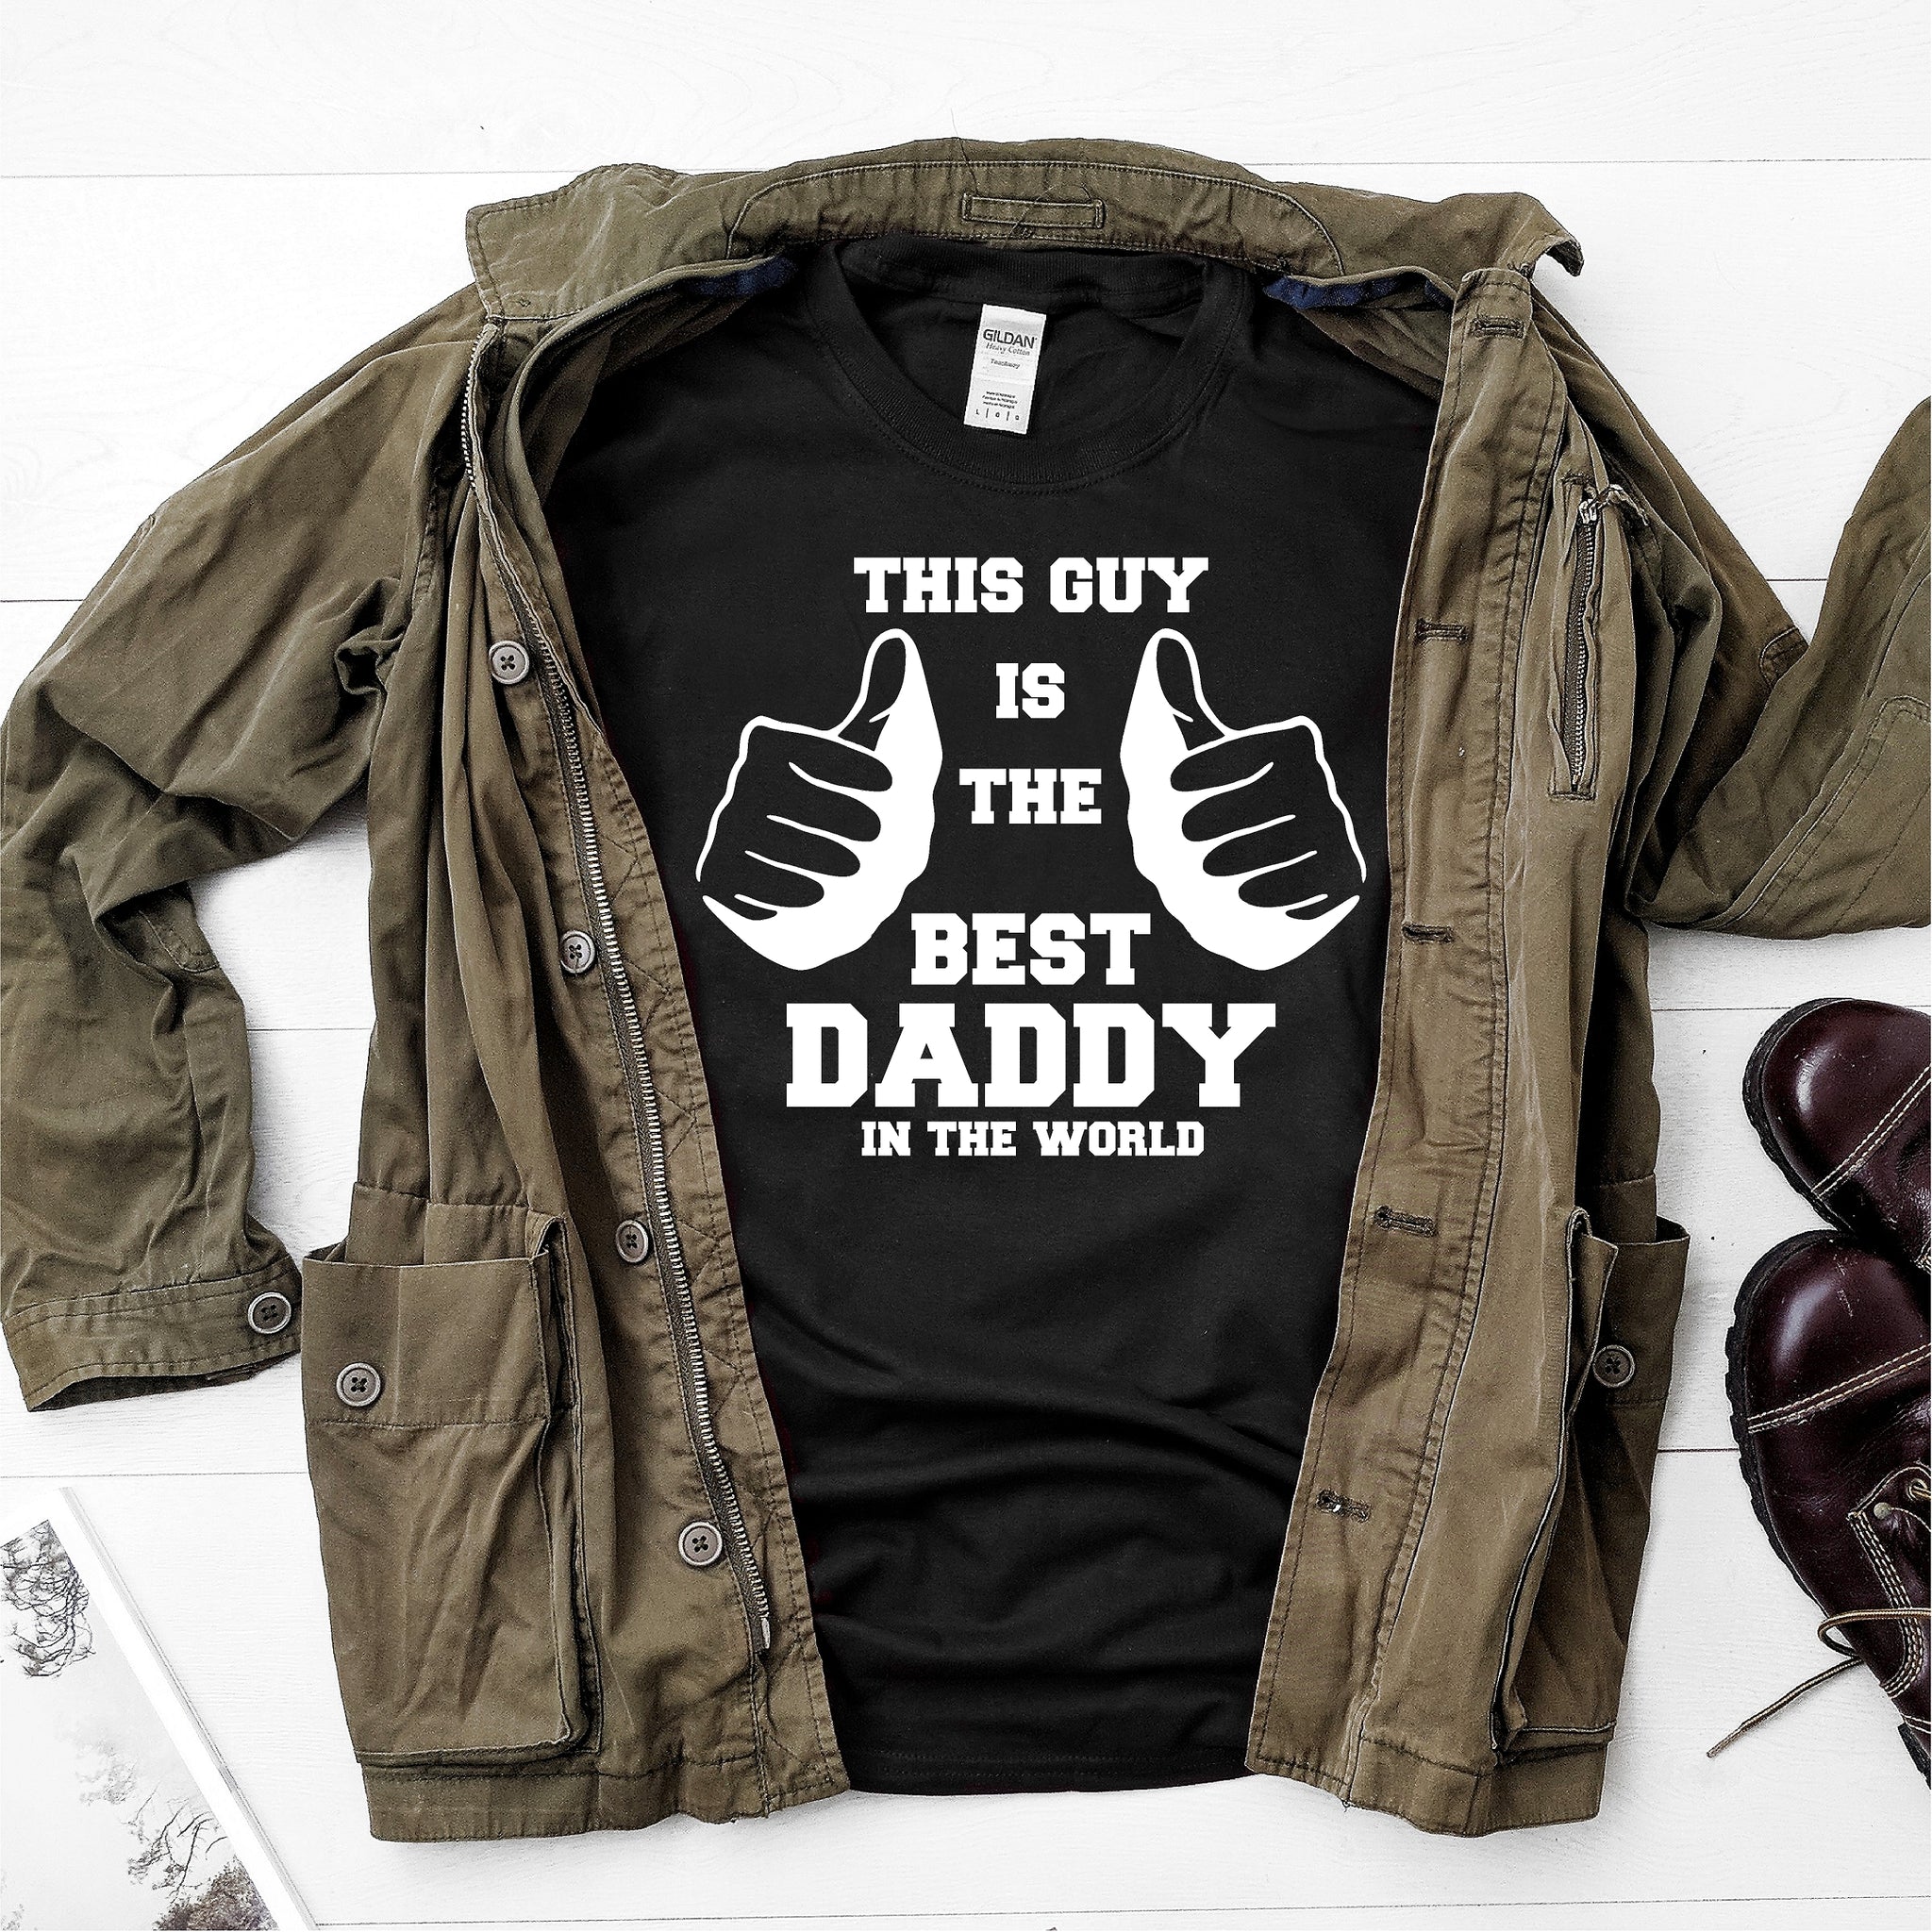 This guy is the best daddy in the world- Ultra Cotton Short Sleeve T-Shirt - DFHM47